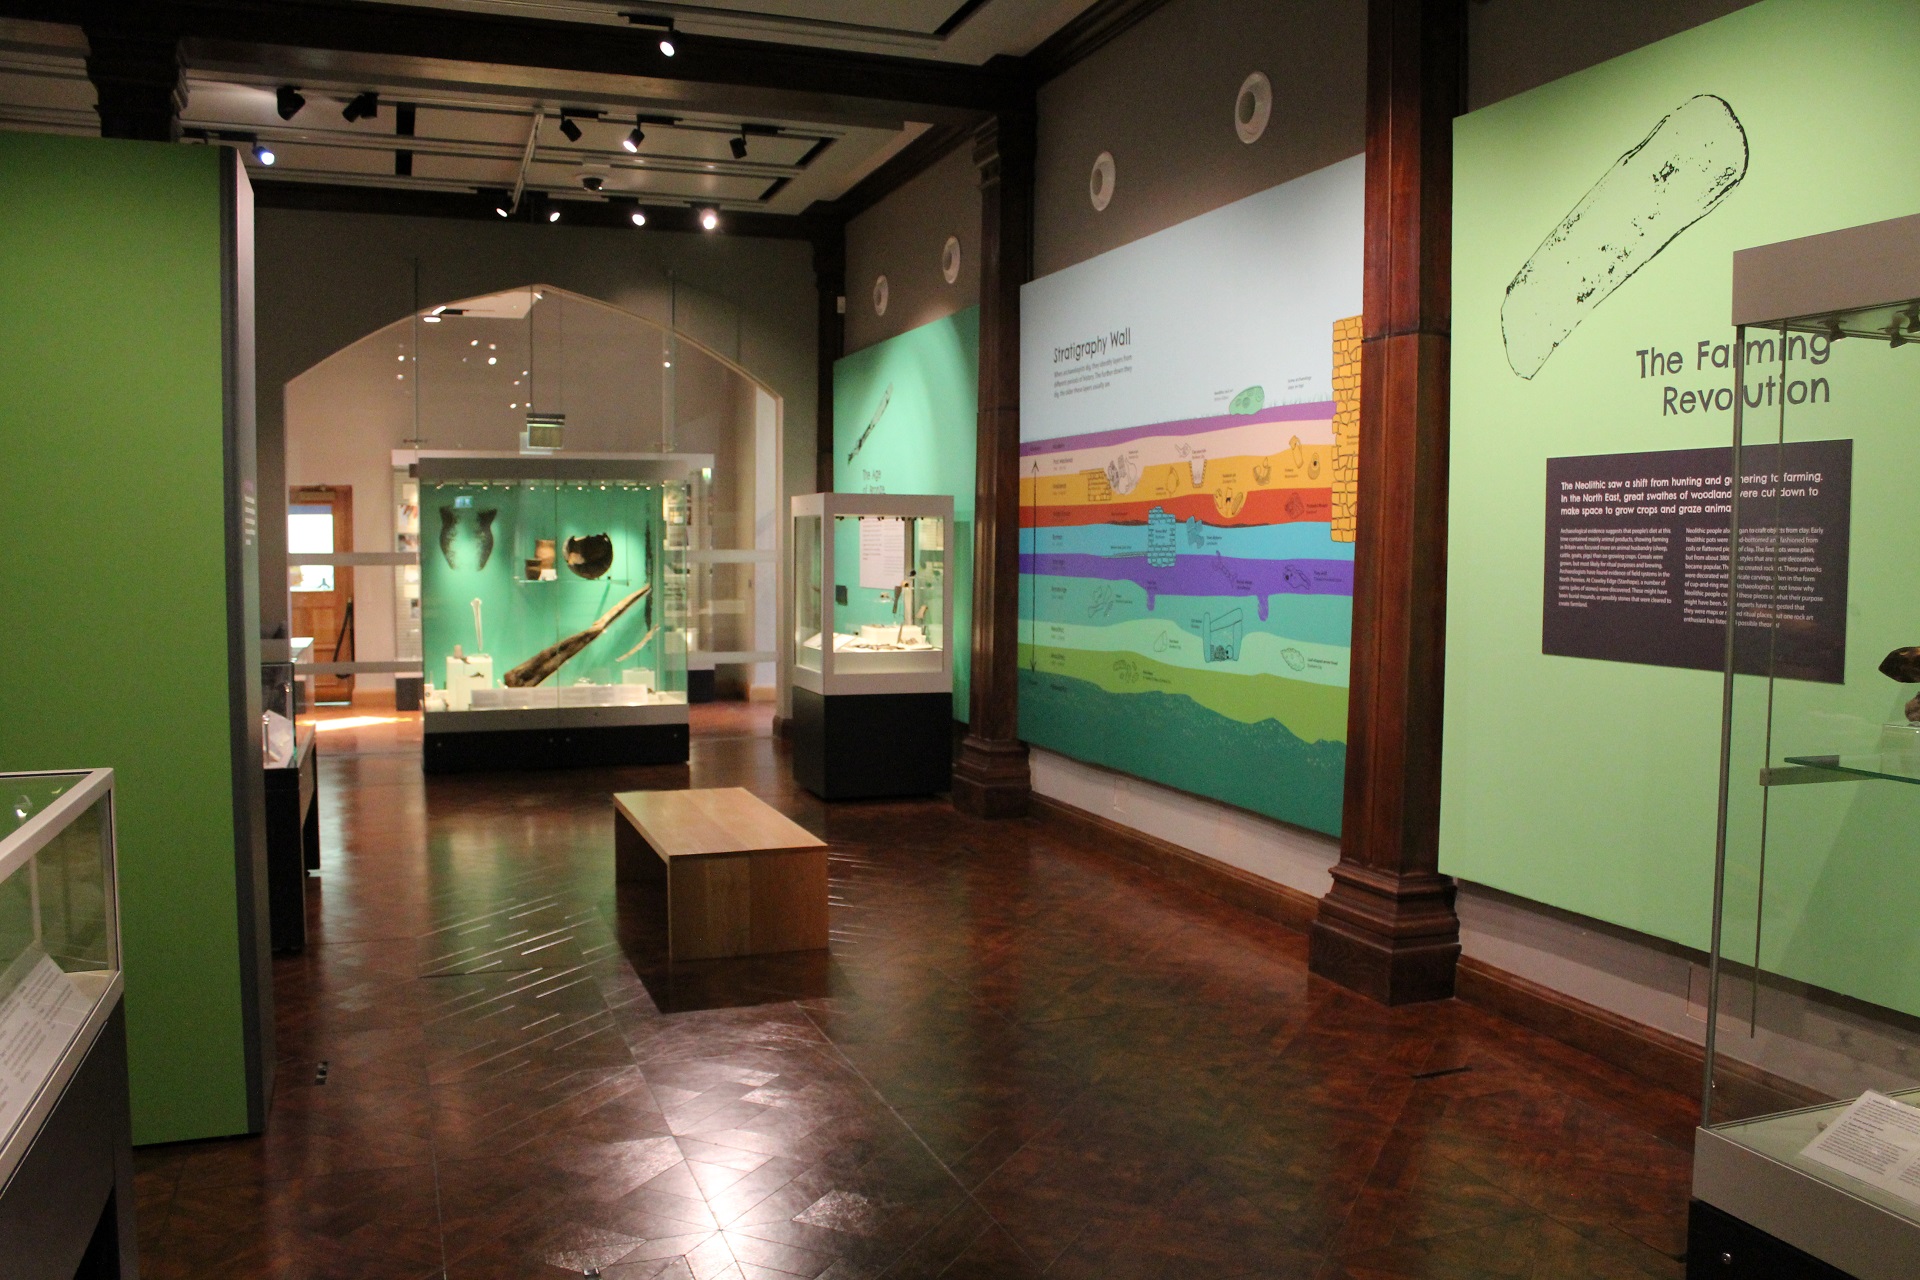 Coloured photograph showing the Prehistory section with its green background in the temporary exhibition at Palace Green Library.